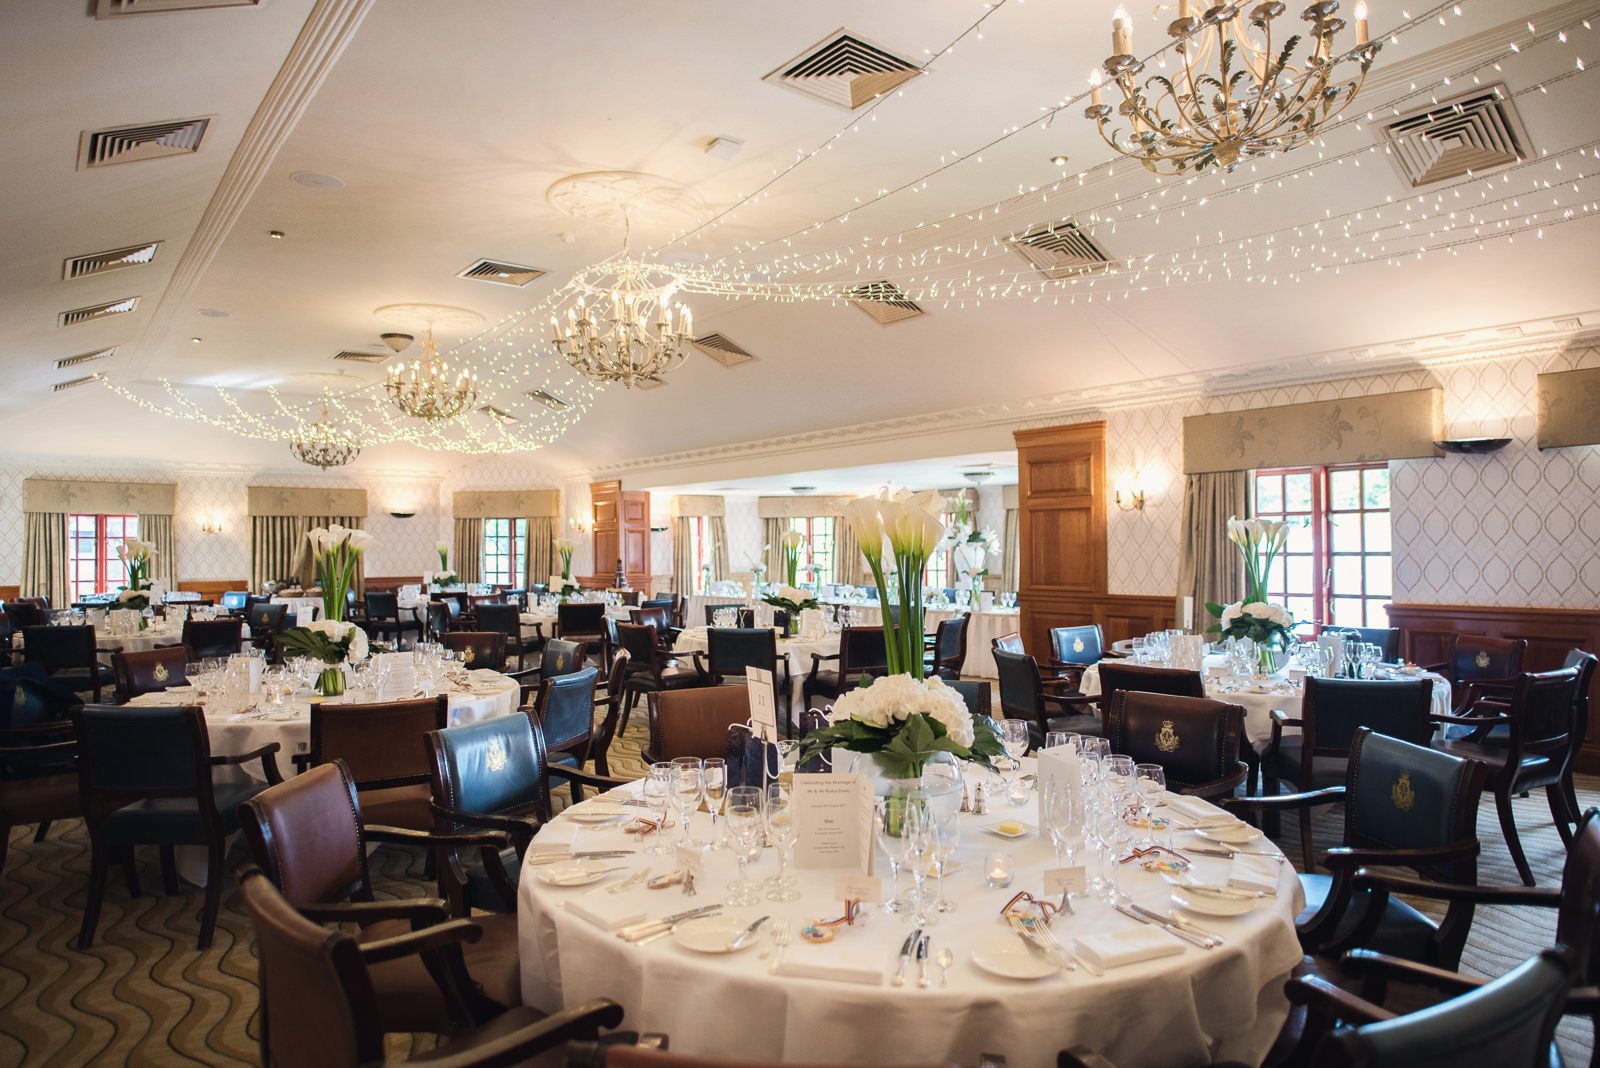 Sandringham suite at Pennyhill Park